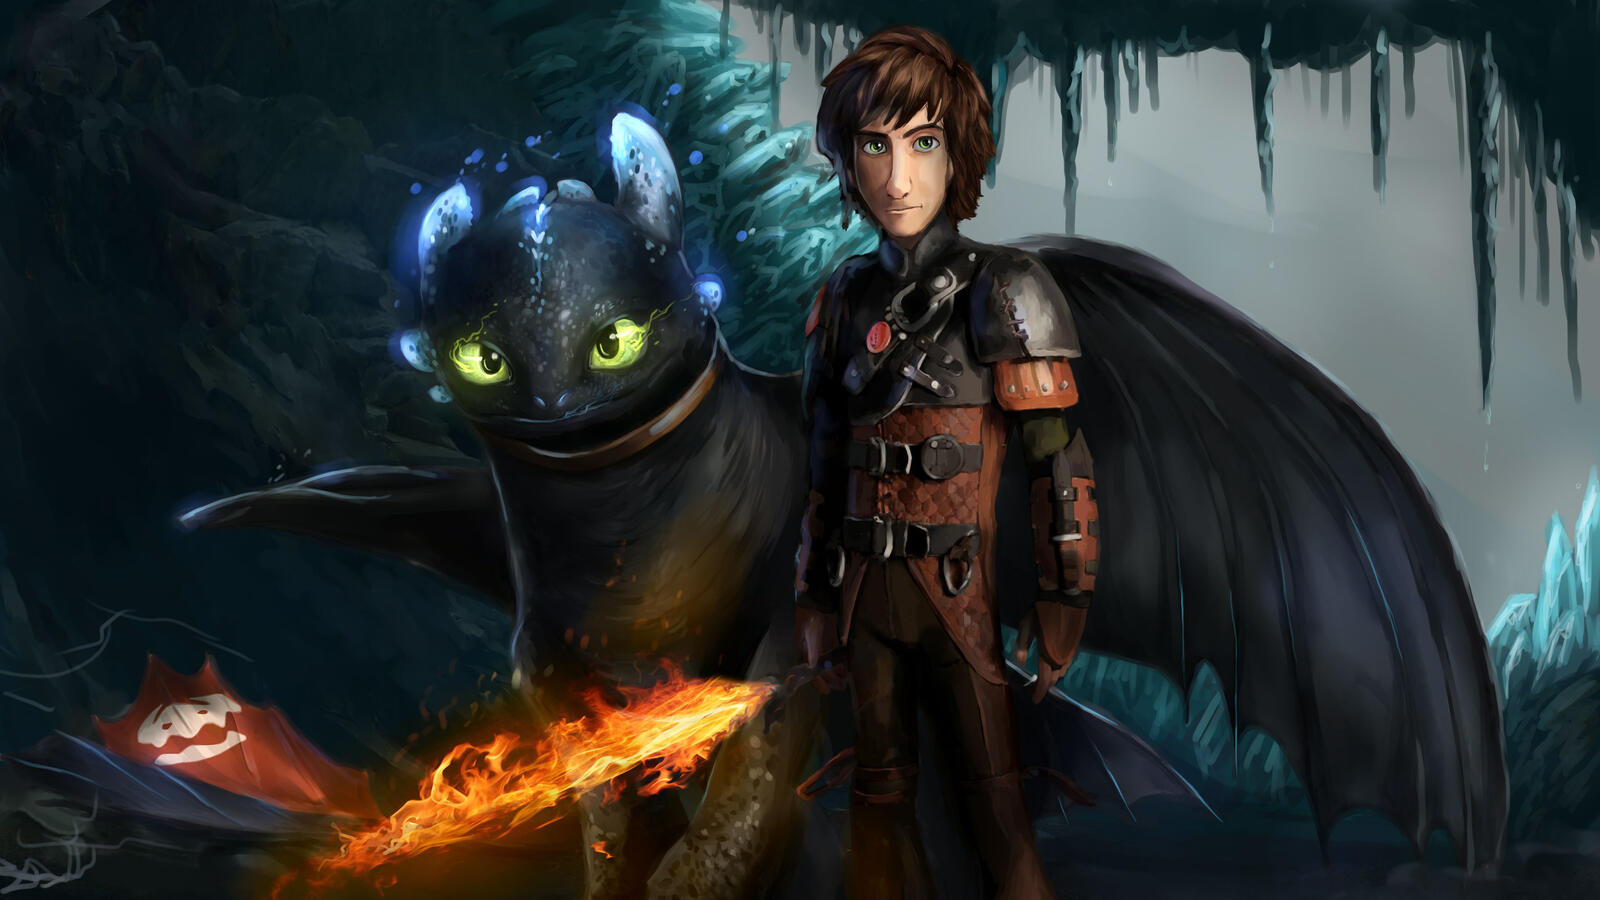 Wallpapers How To Train Your Dragon The Hidden World How To Train Your Dragon 3 how to train your dragon on the desktop